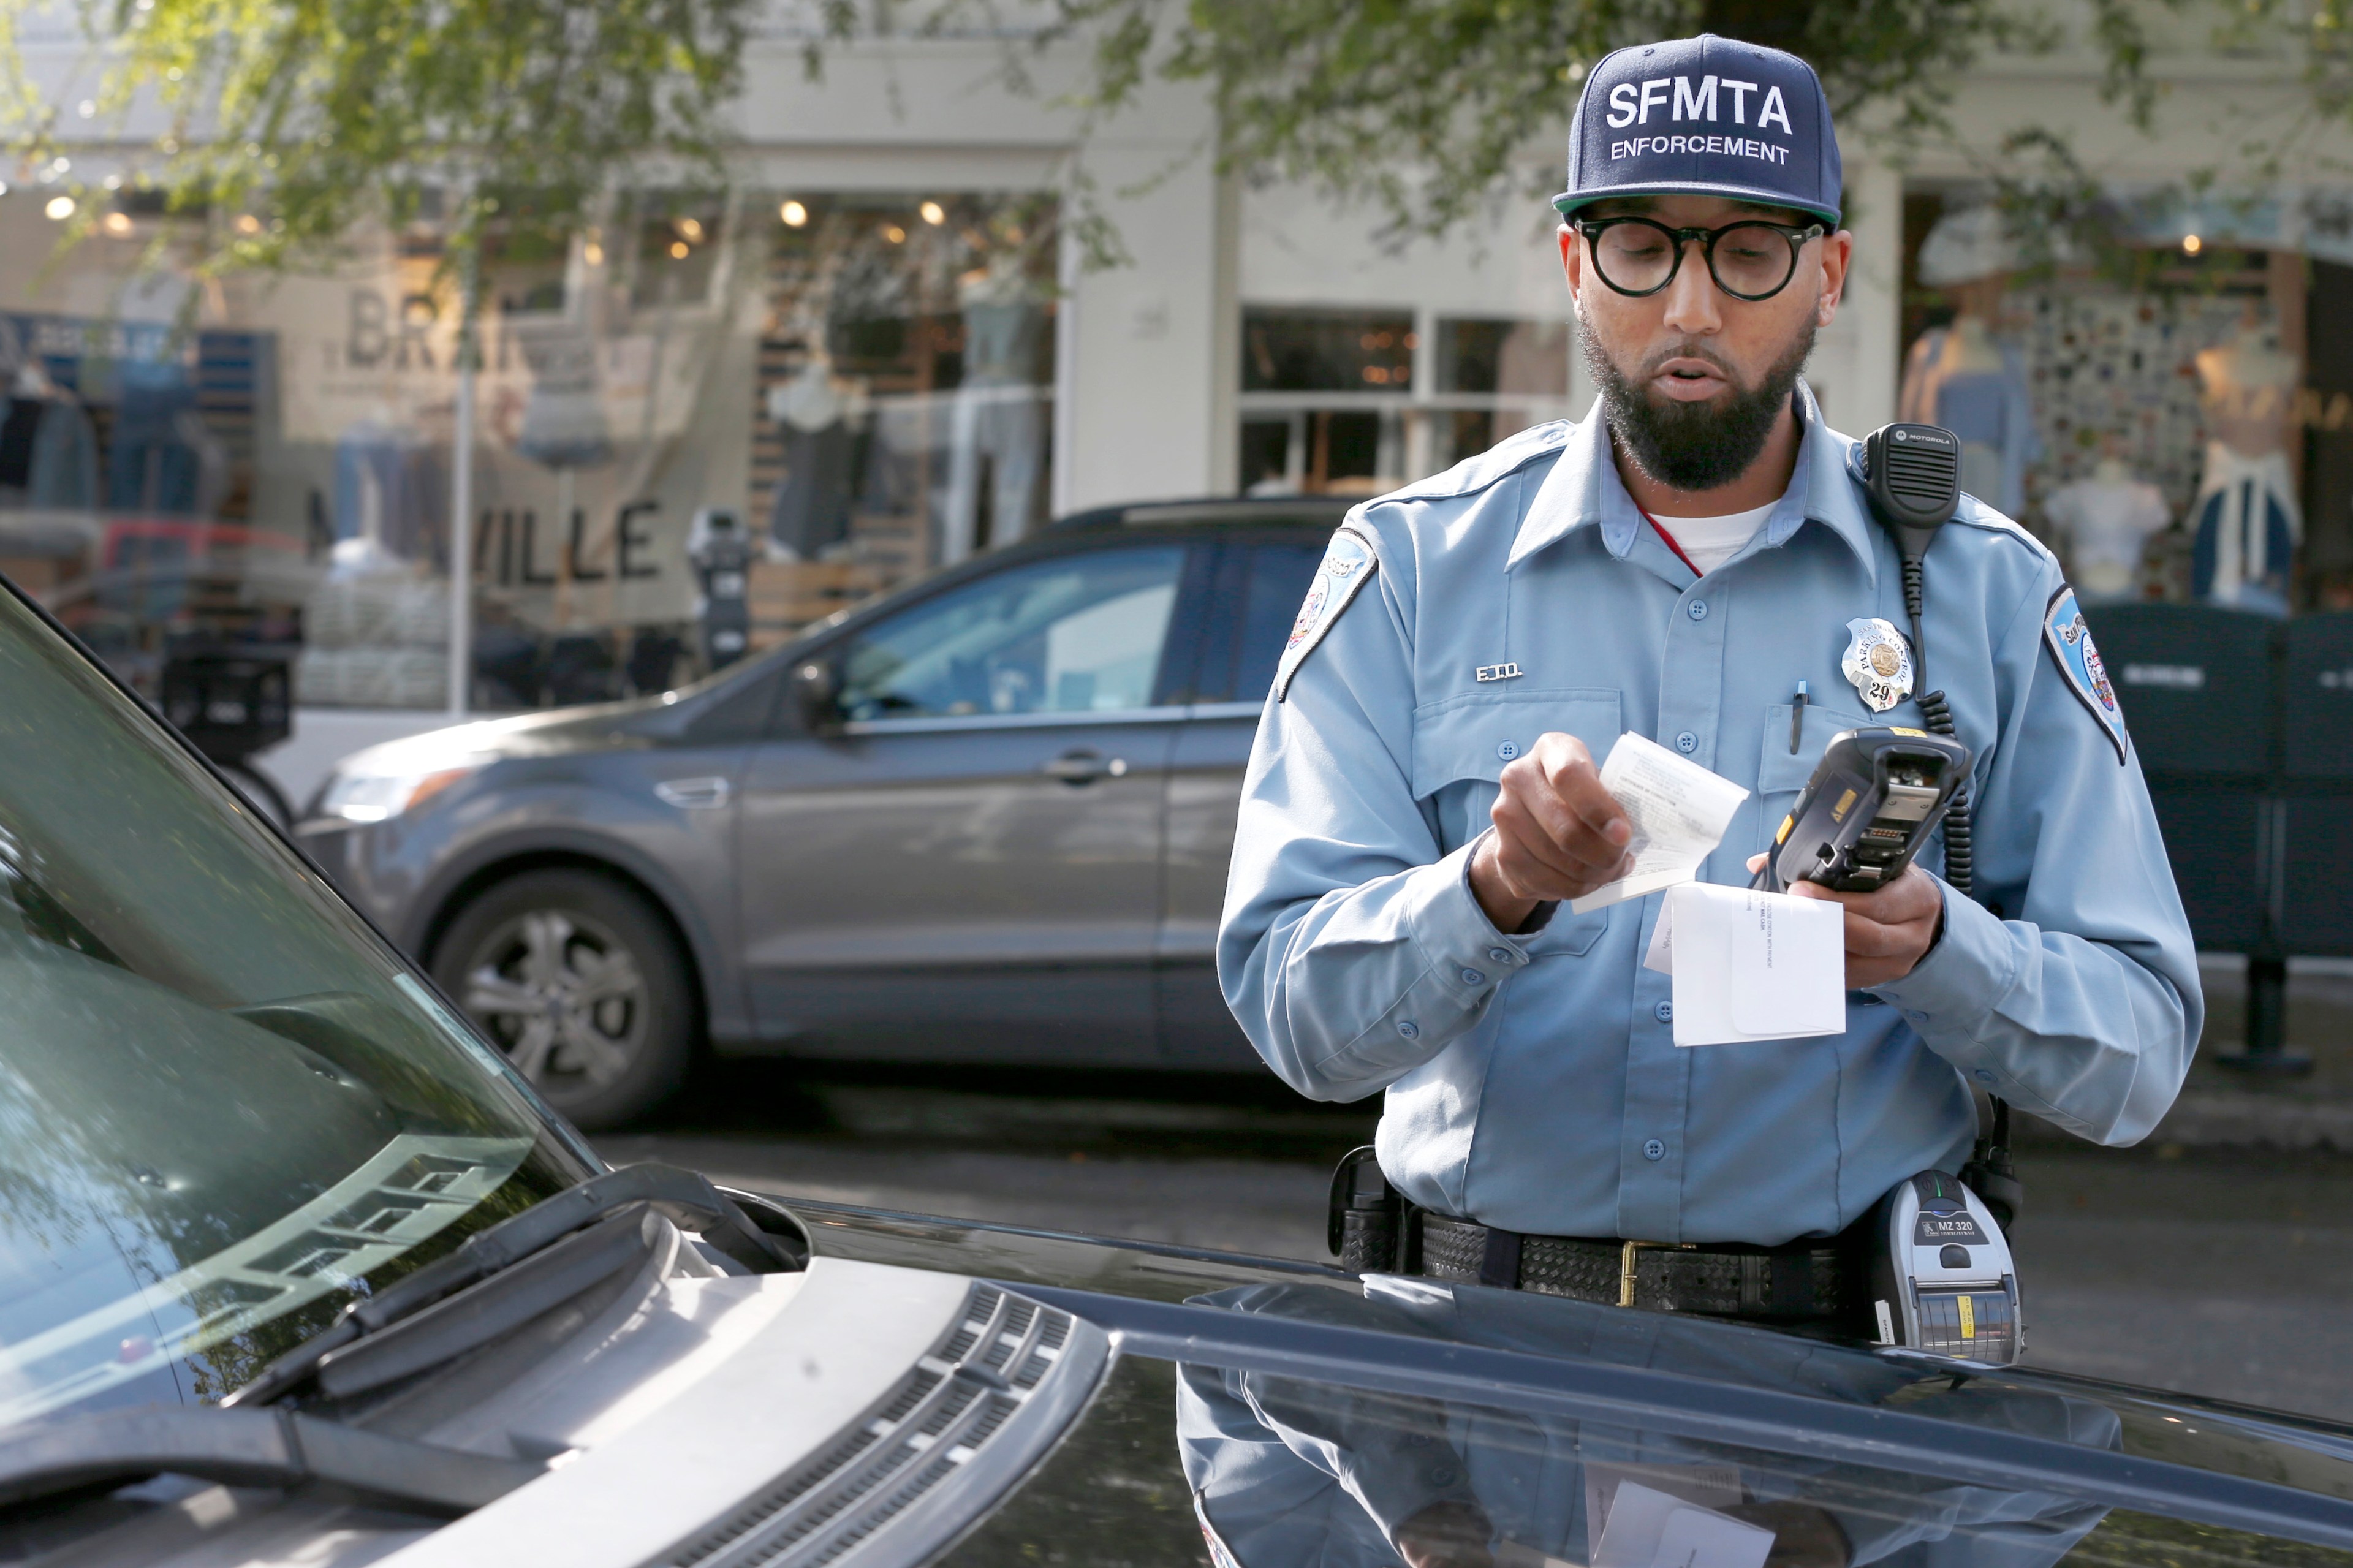 A parking control officer wearing a blue hat issues a parking ticket.